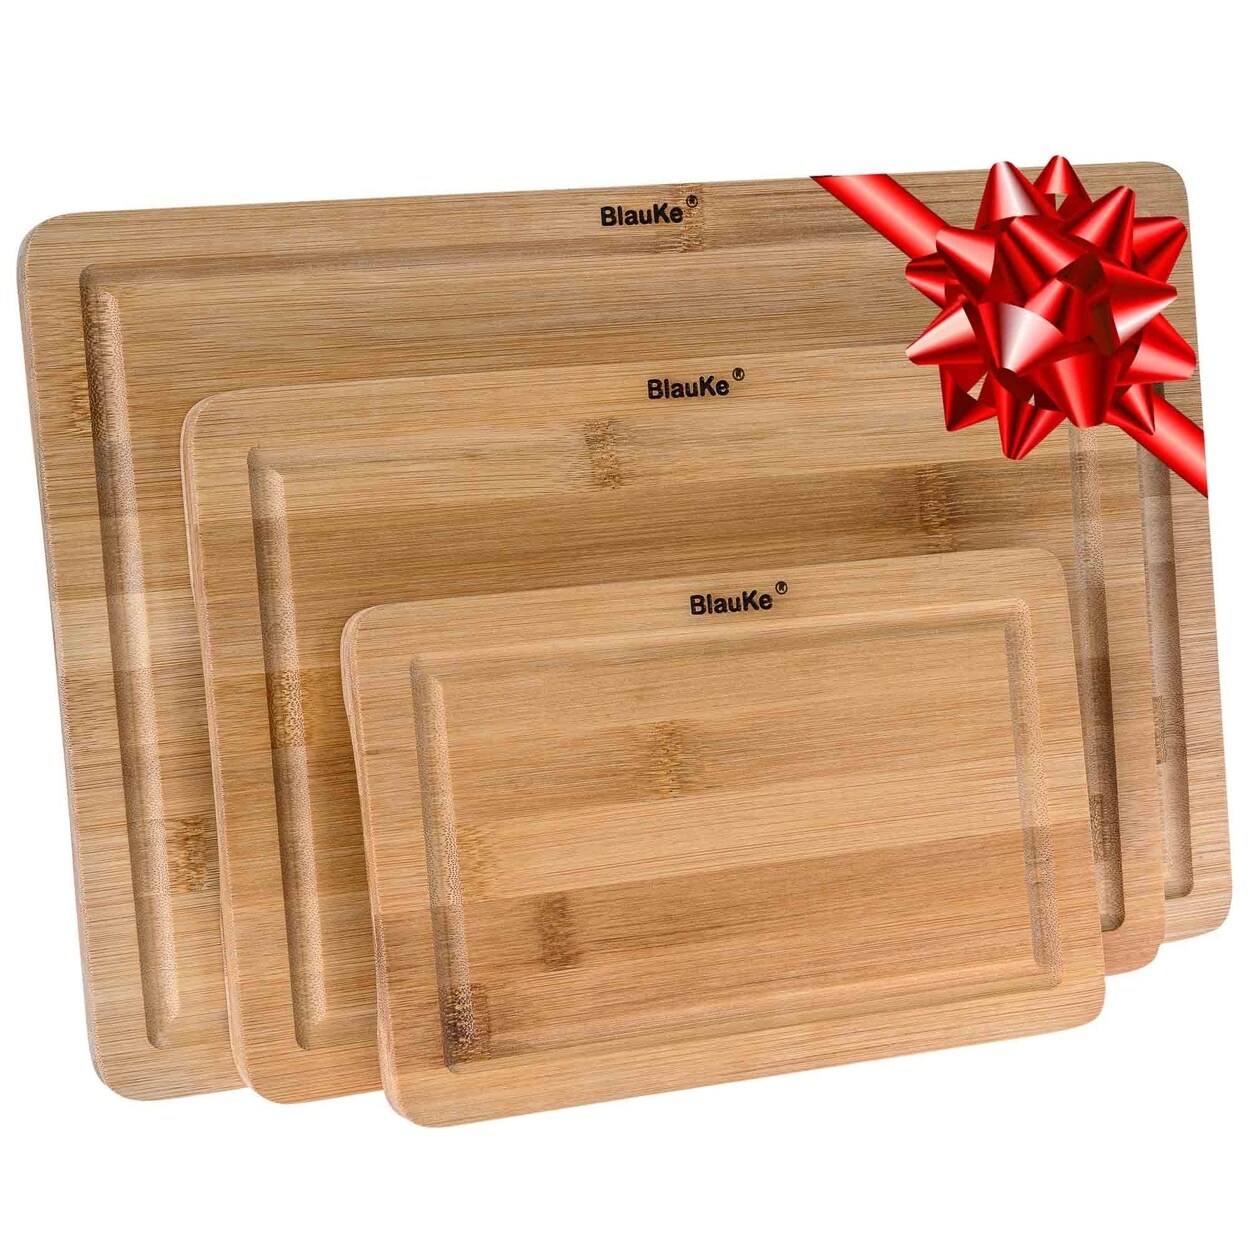 BlauKe Wooden Cutting Boards for Kitchen with Juice Groove and Handles - Bamboo Chopping Boards Set of 3 - Wood Serving Trays